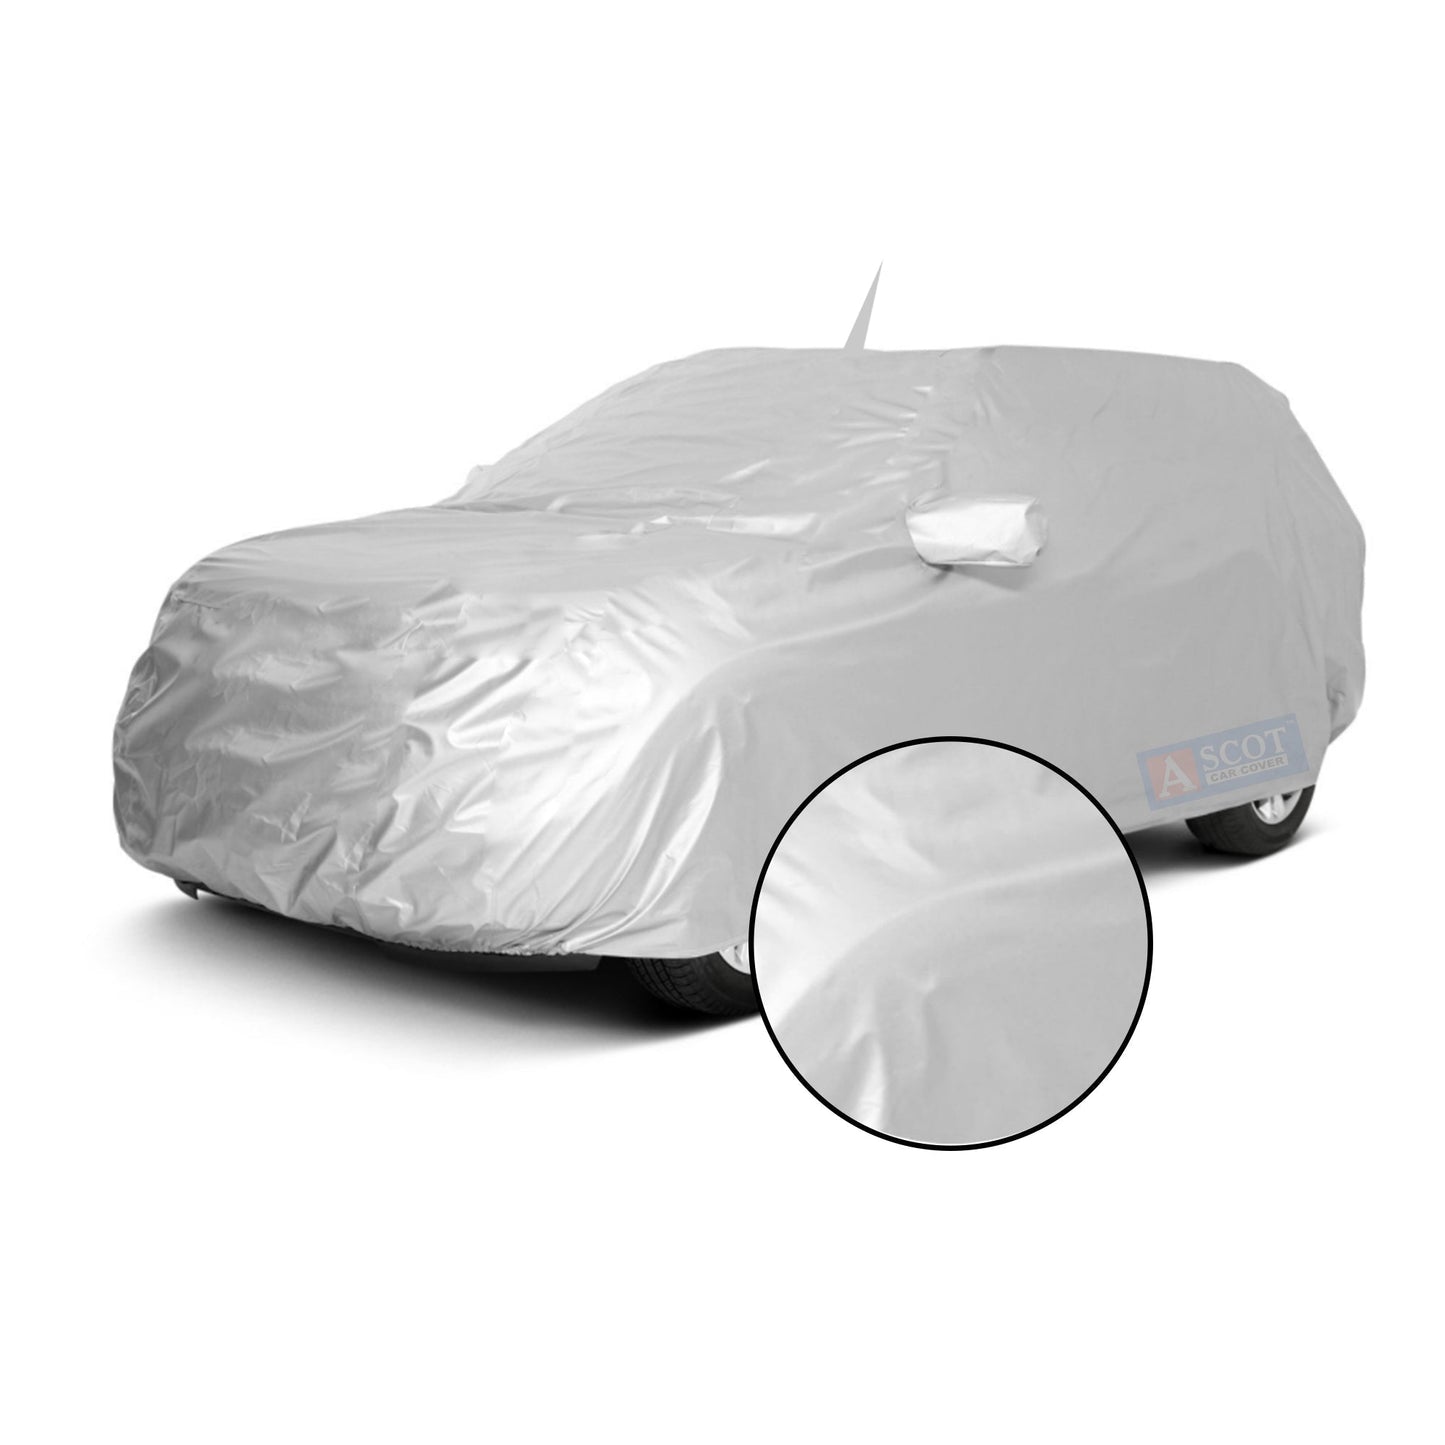 Ascot Renault Fluence Car Body Cover Dust Proof, Trippel Stitched